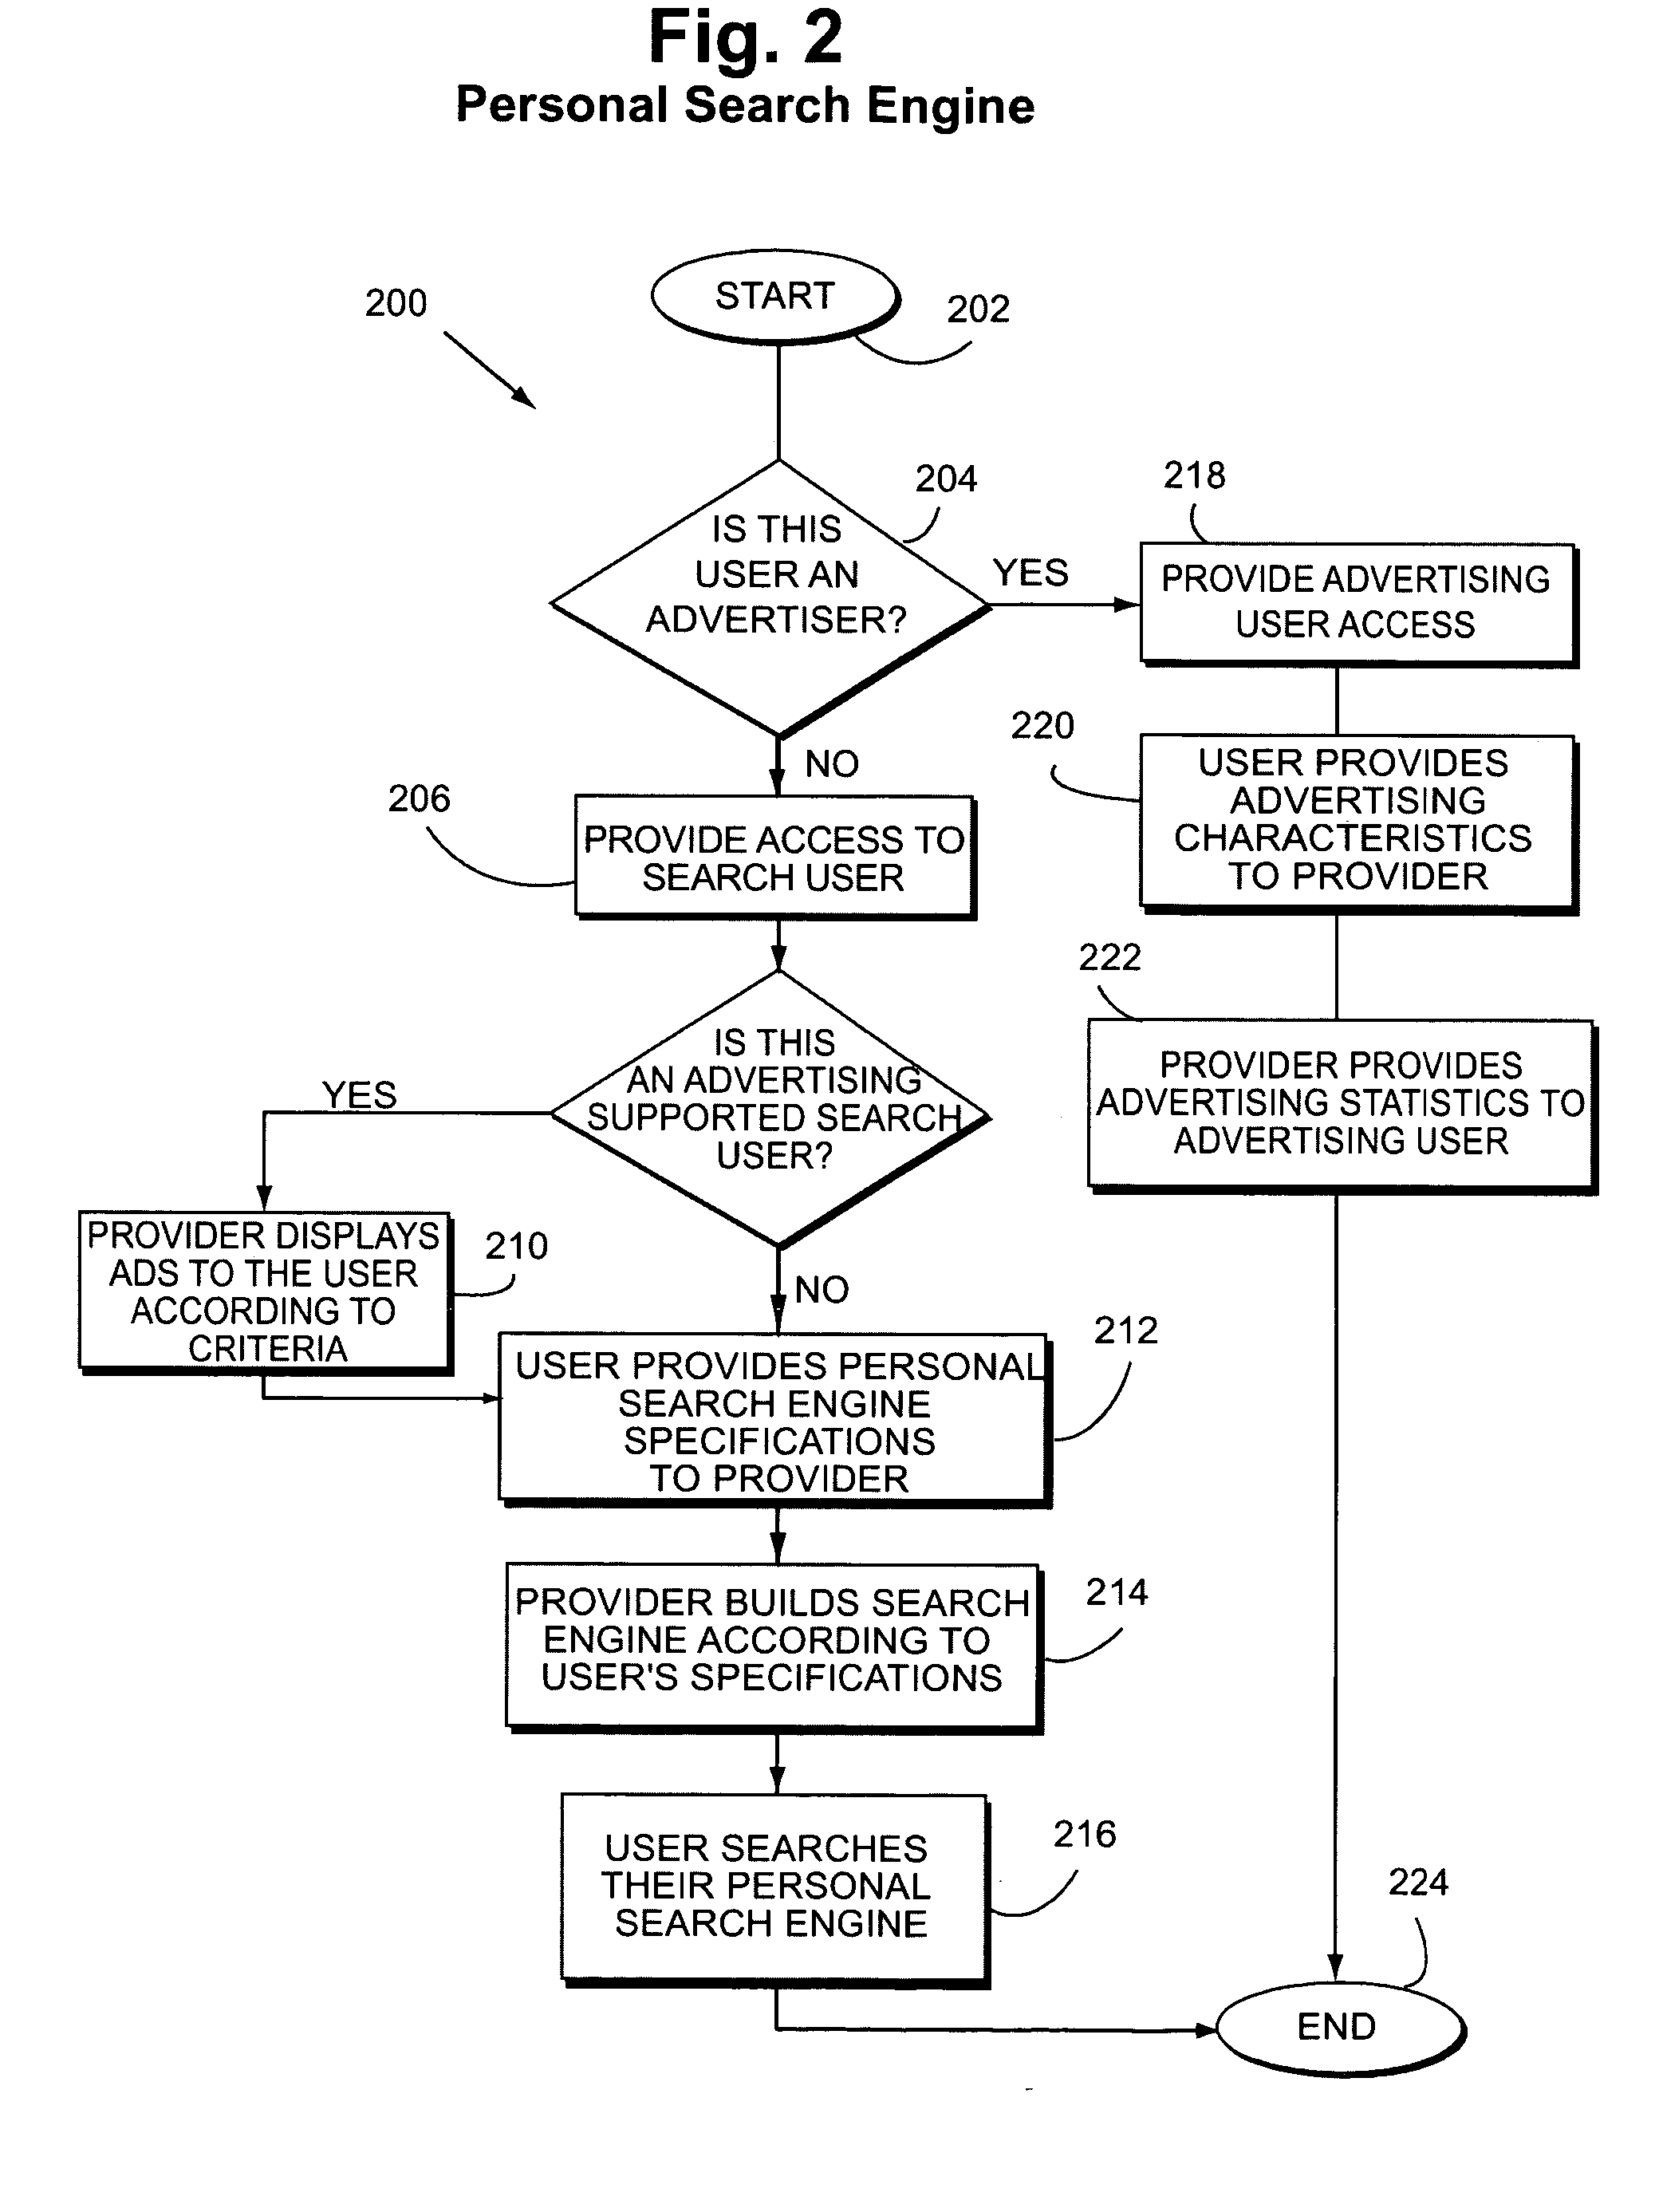 System and method for a modular user controlled search engine